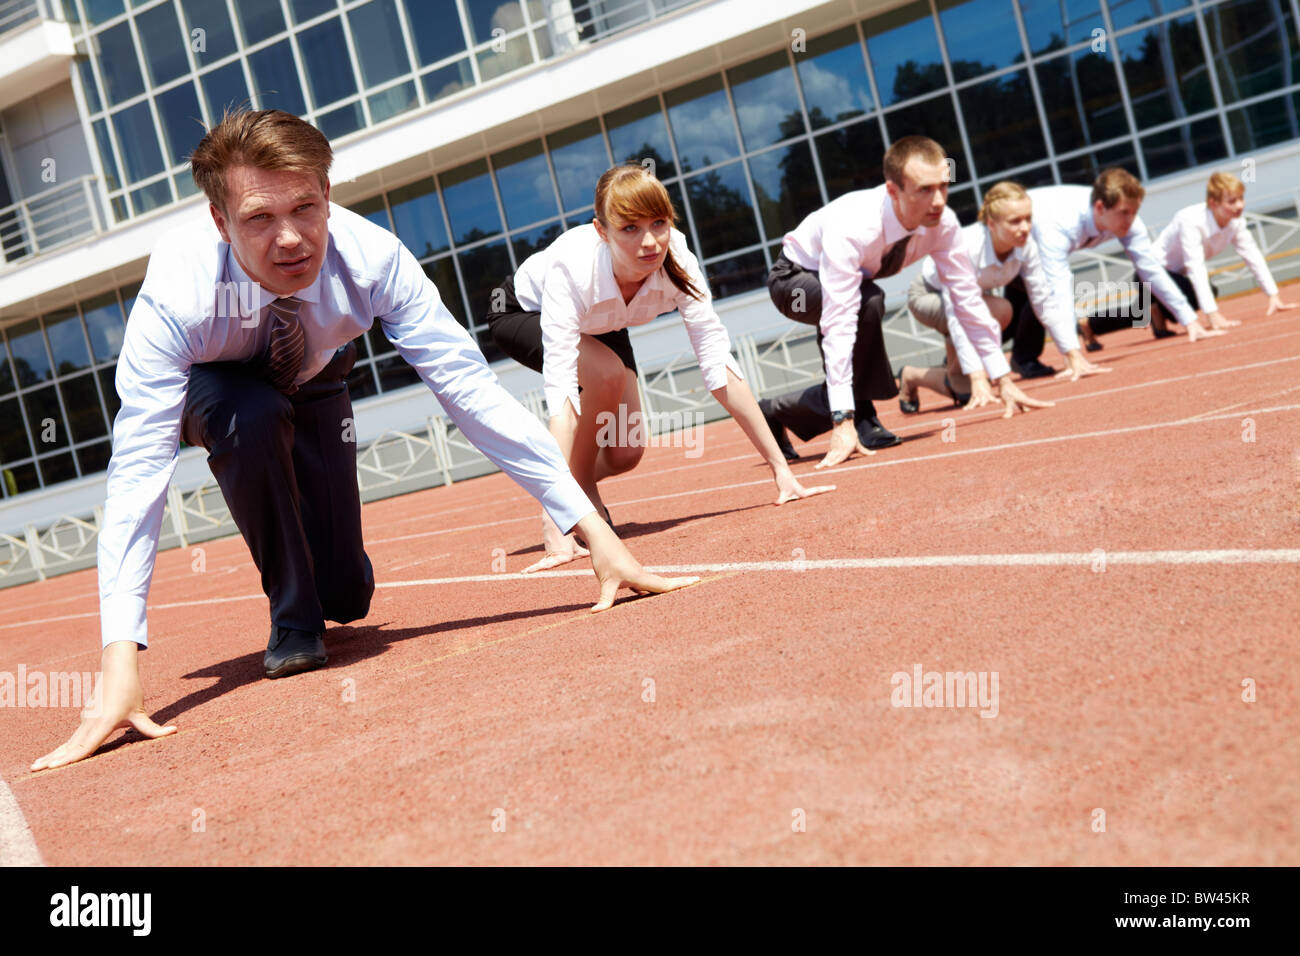 Confident business people lined up getting ready for race Stock Photo